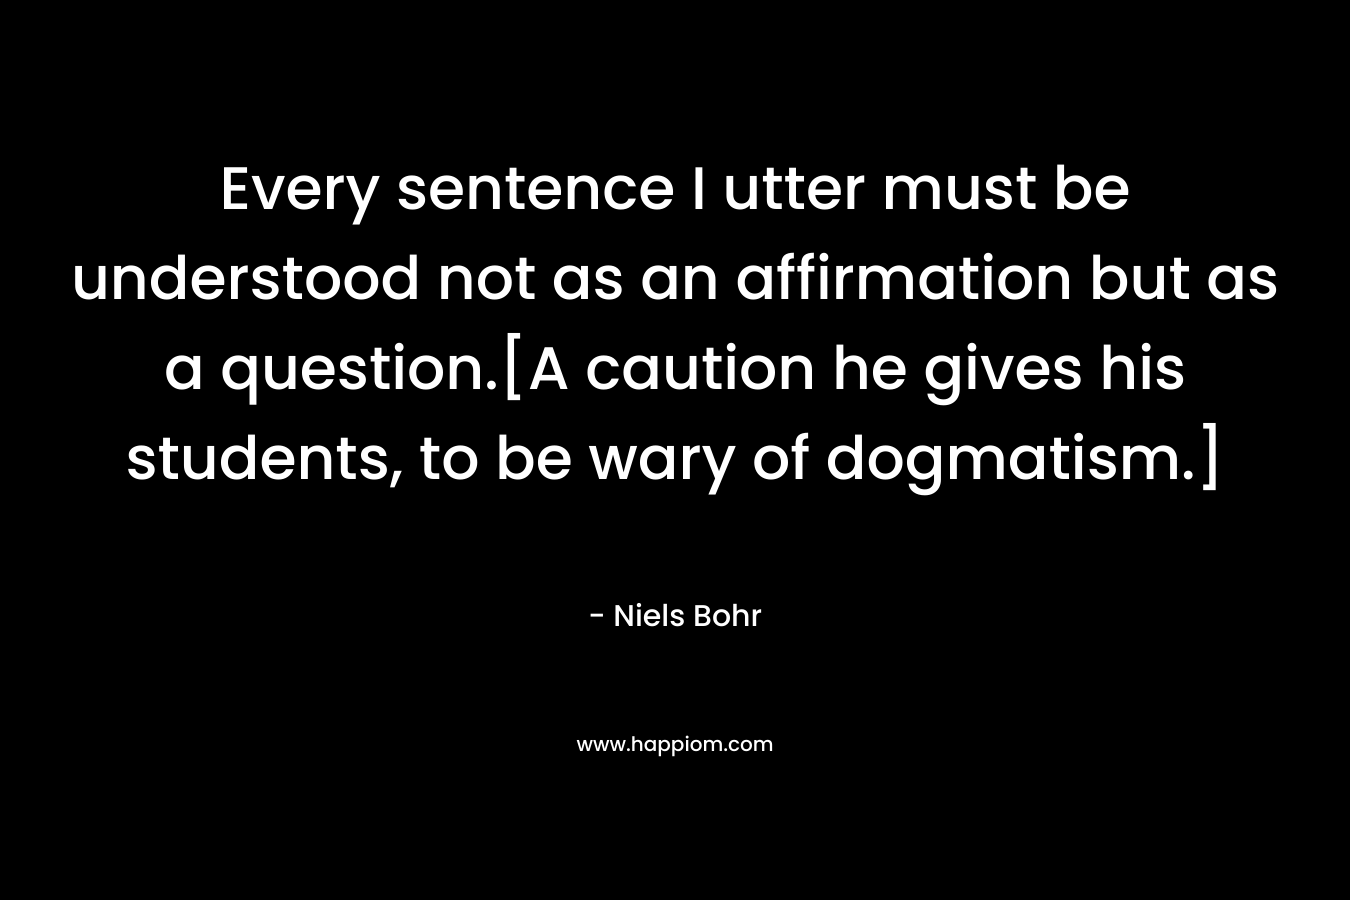 Every sentence I utter must be understood not as an affirmation but as a question.[A caution he gives his students, to be wary of dogmatism.]